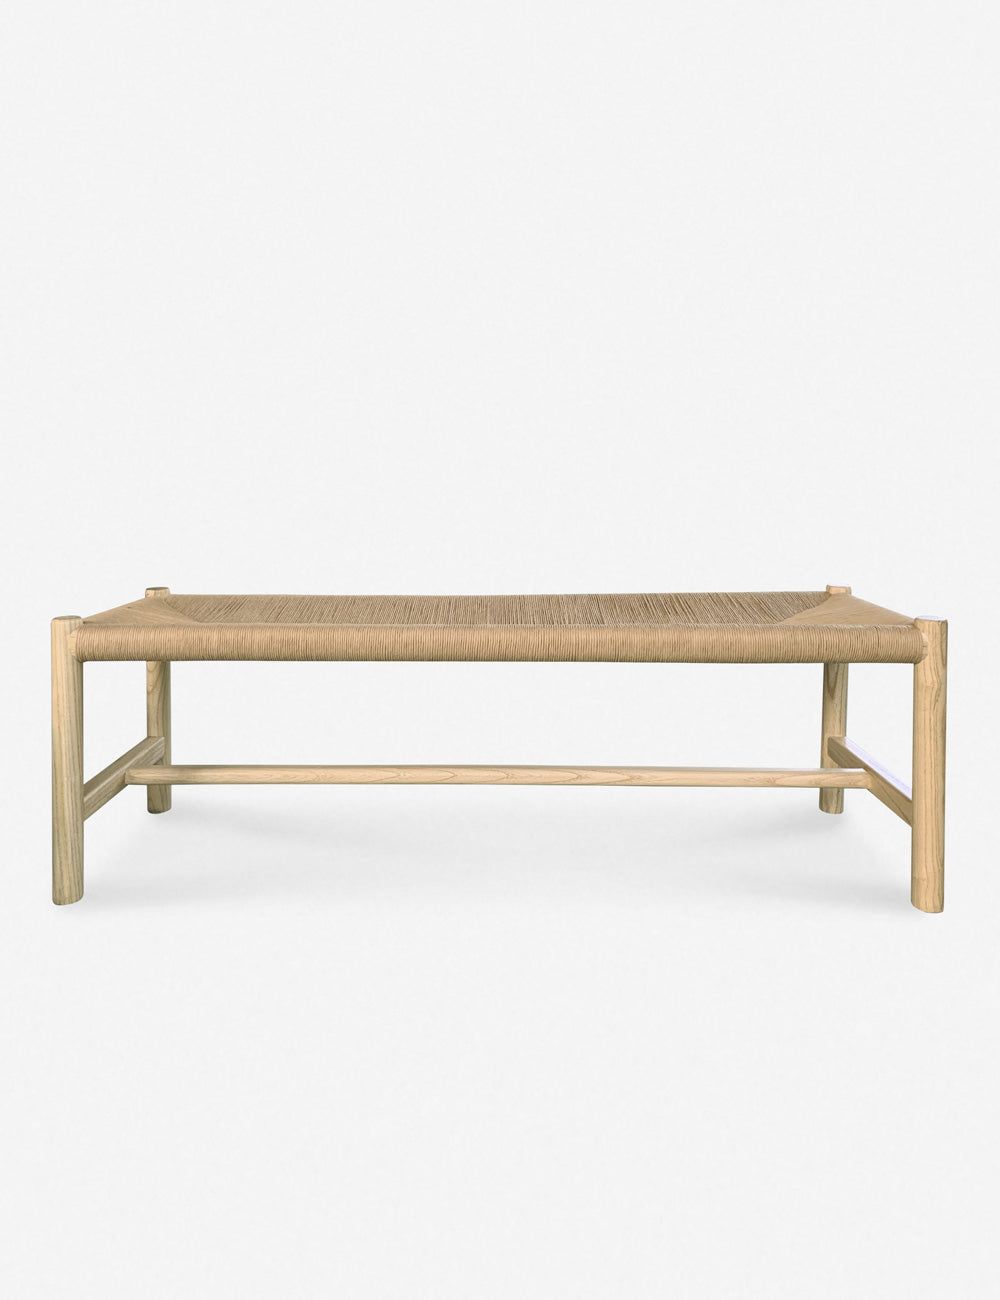 Hawthorn Natural Elm Wood Bench with Woven Fiber Rope Seat